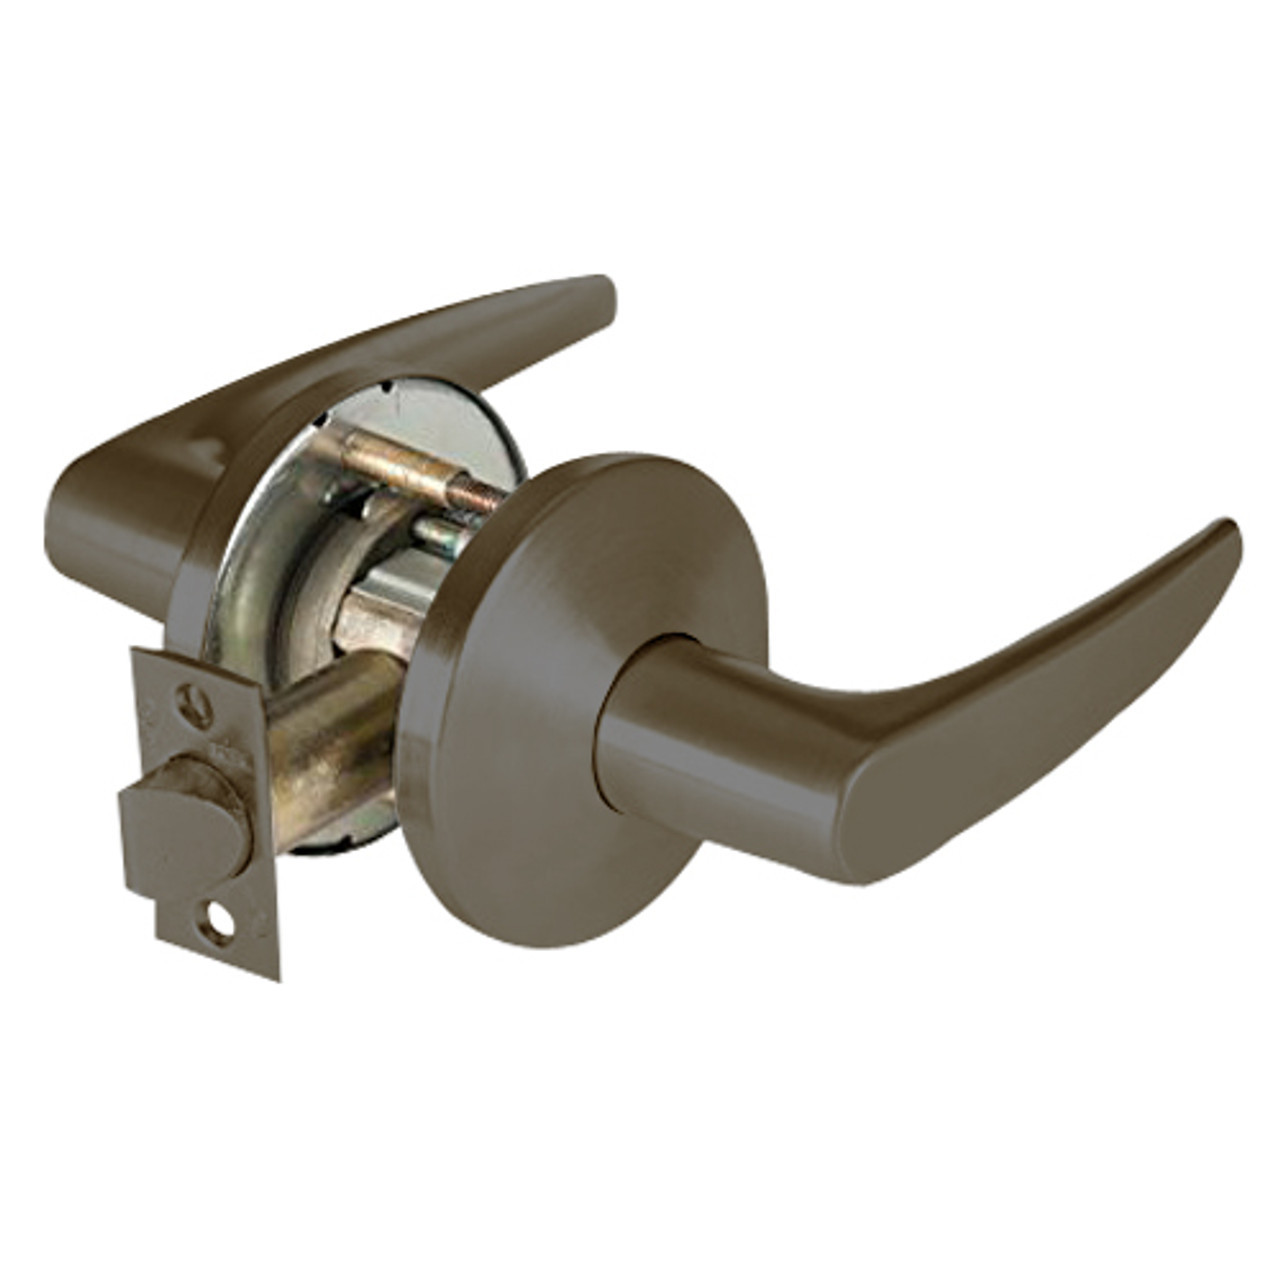 9K30N16LSTK613LM Best 9K Series Passage Heavy Duty Cylindrical Lever Locks with Curved Without Return Lever Design in Oil Rubbed Bronze